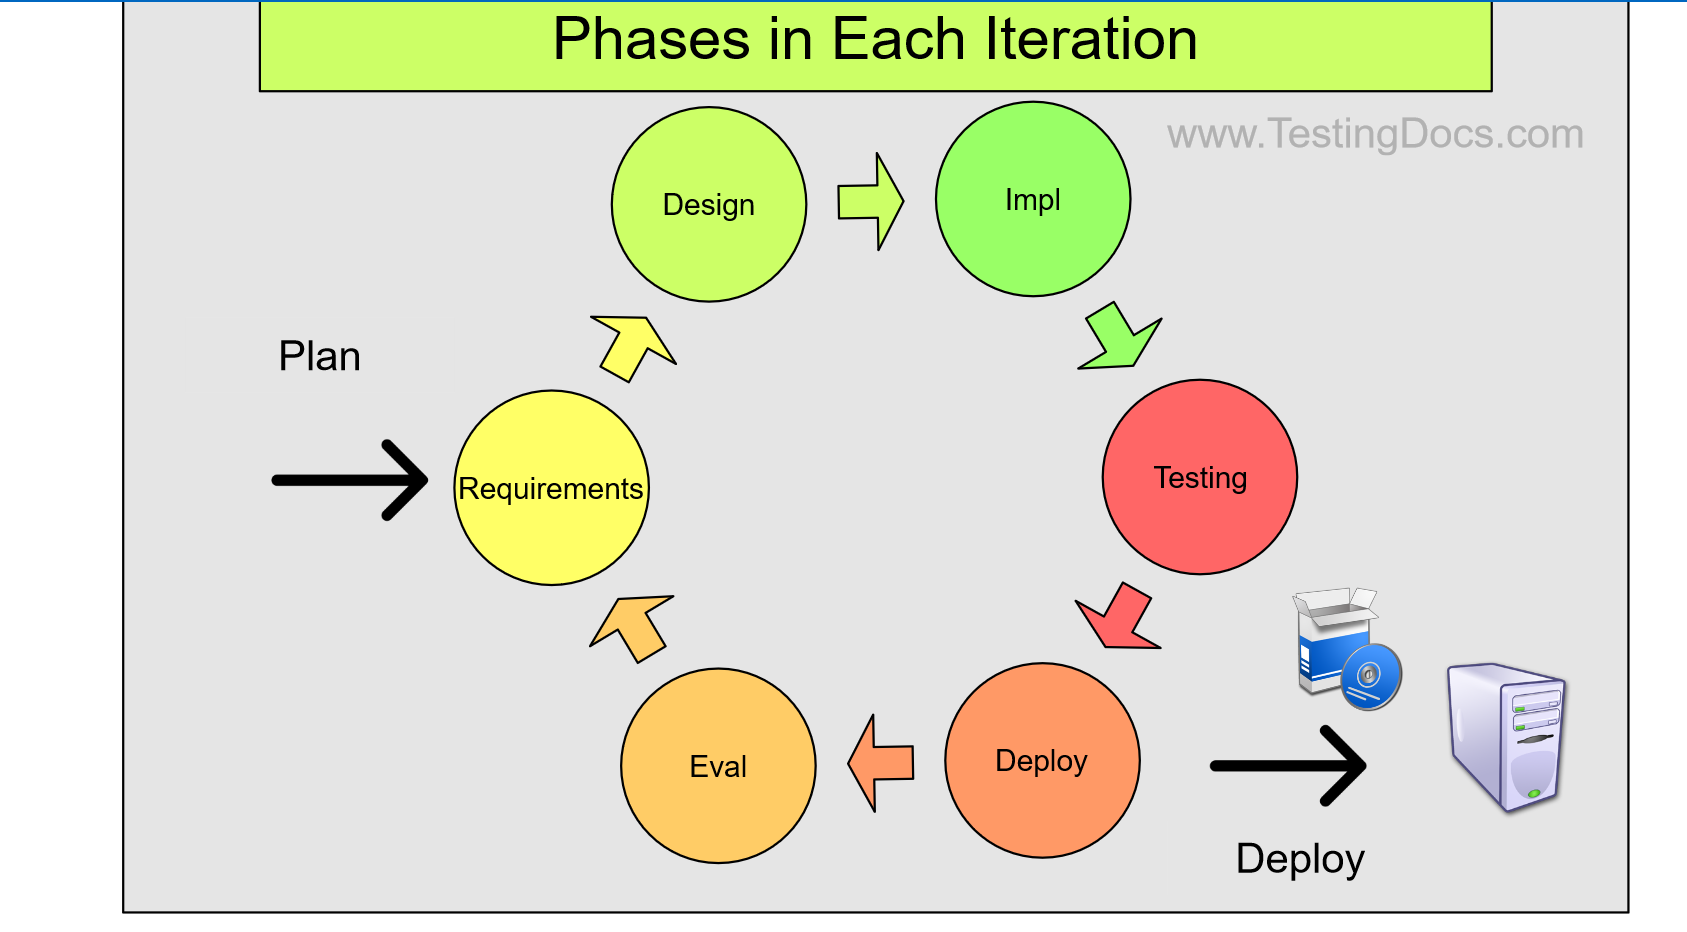 Phases in Each Iteration